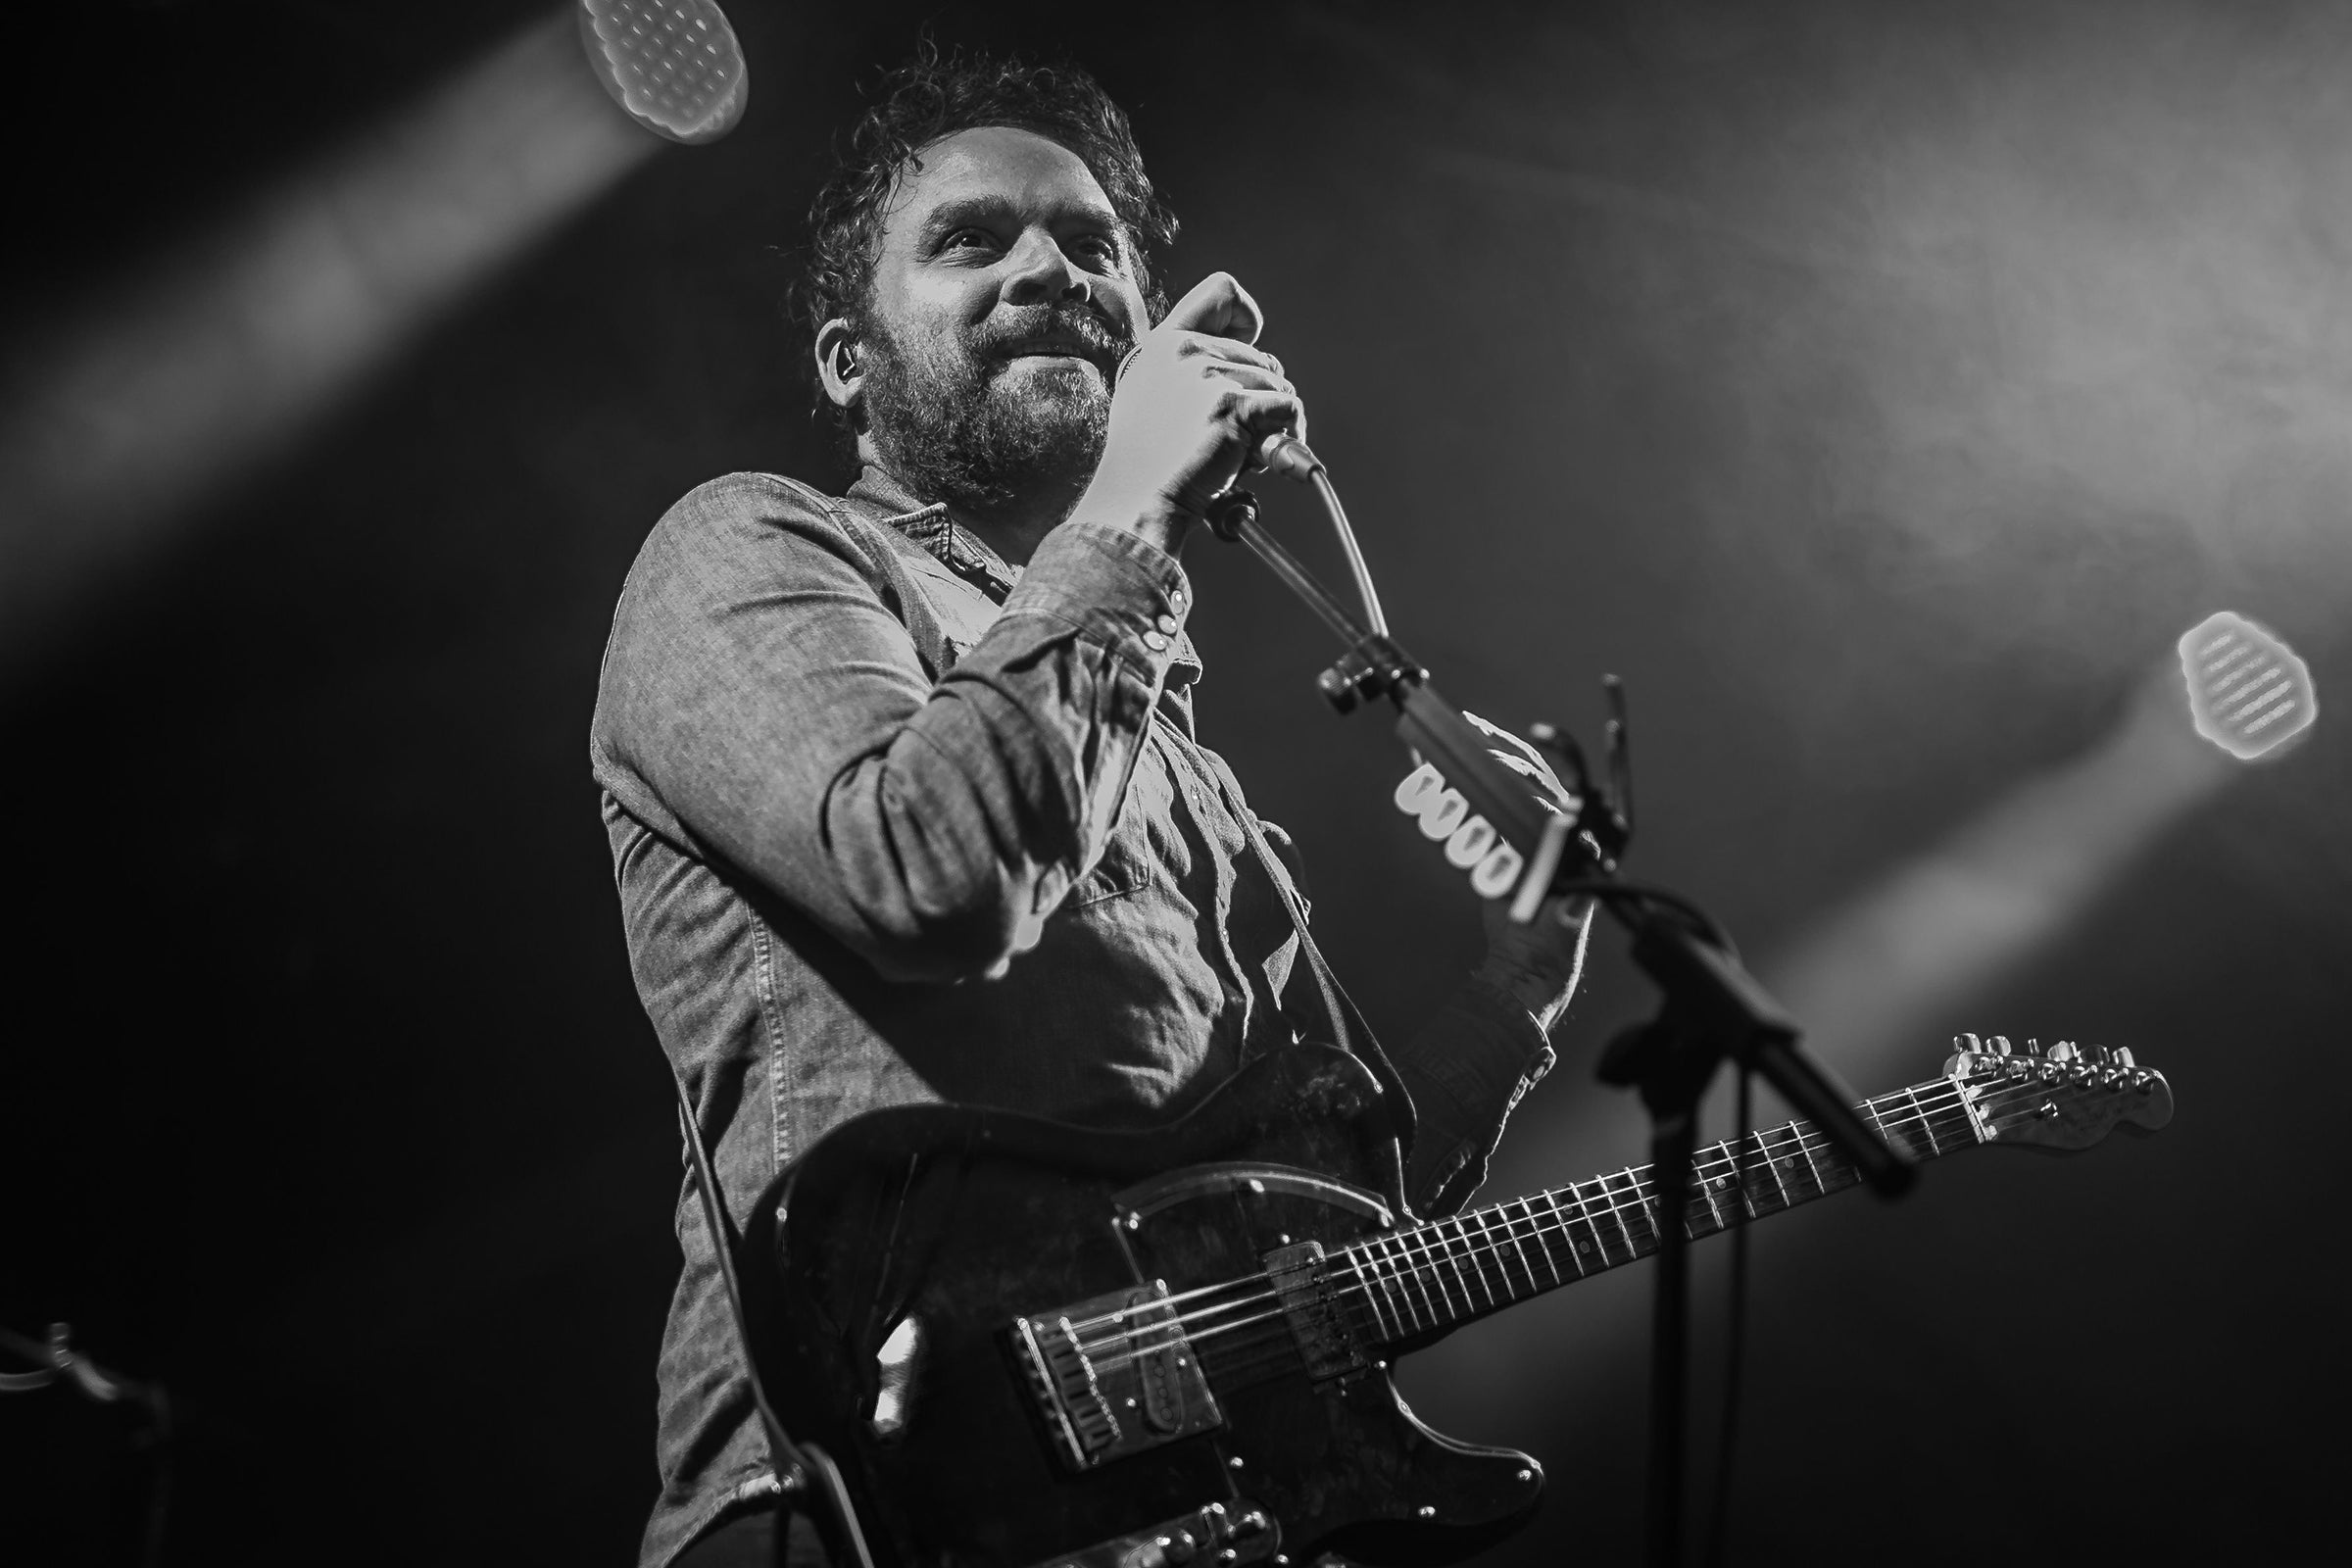 Scott Hutchison: “Frightened Rabbit found their people because they spoke a truth for so long,” says McNair